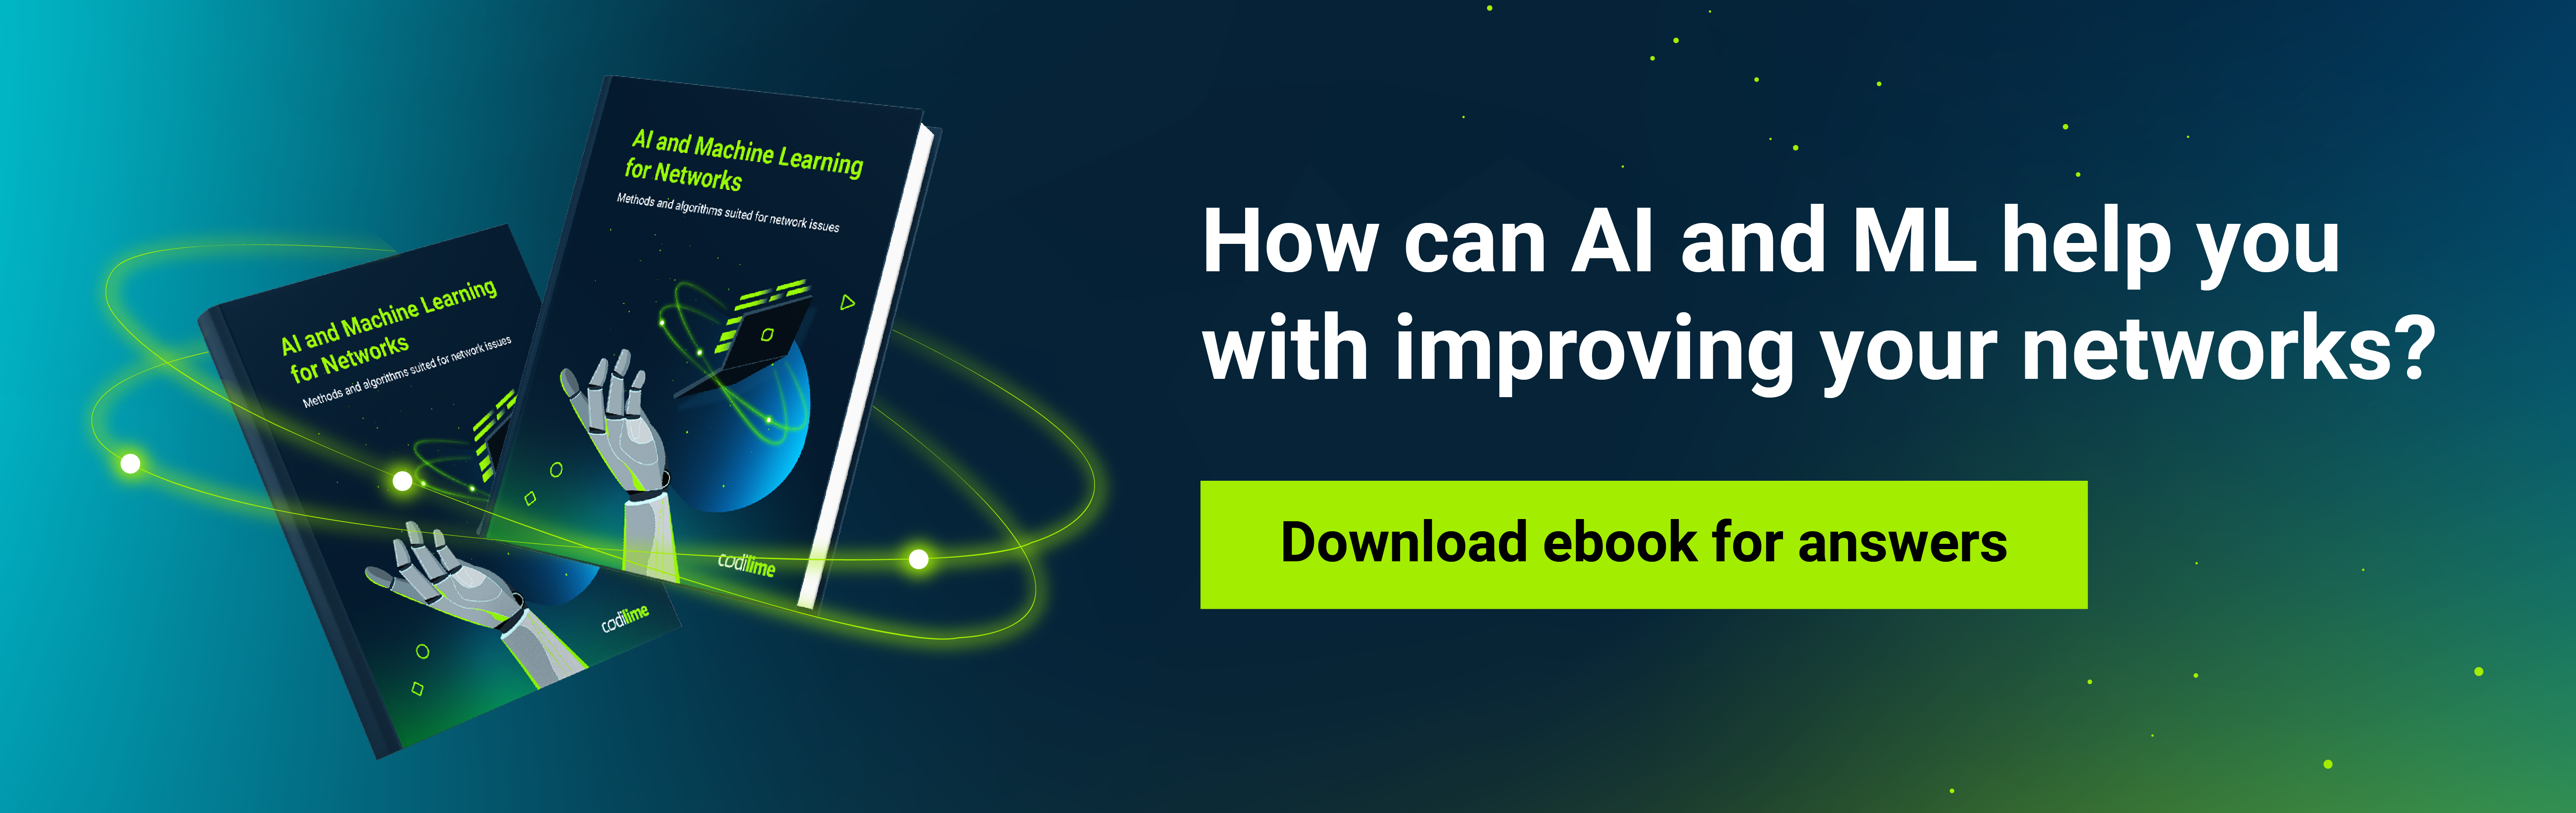 Ebook ML AI for networks